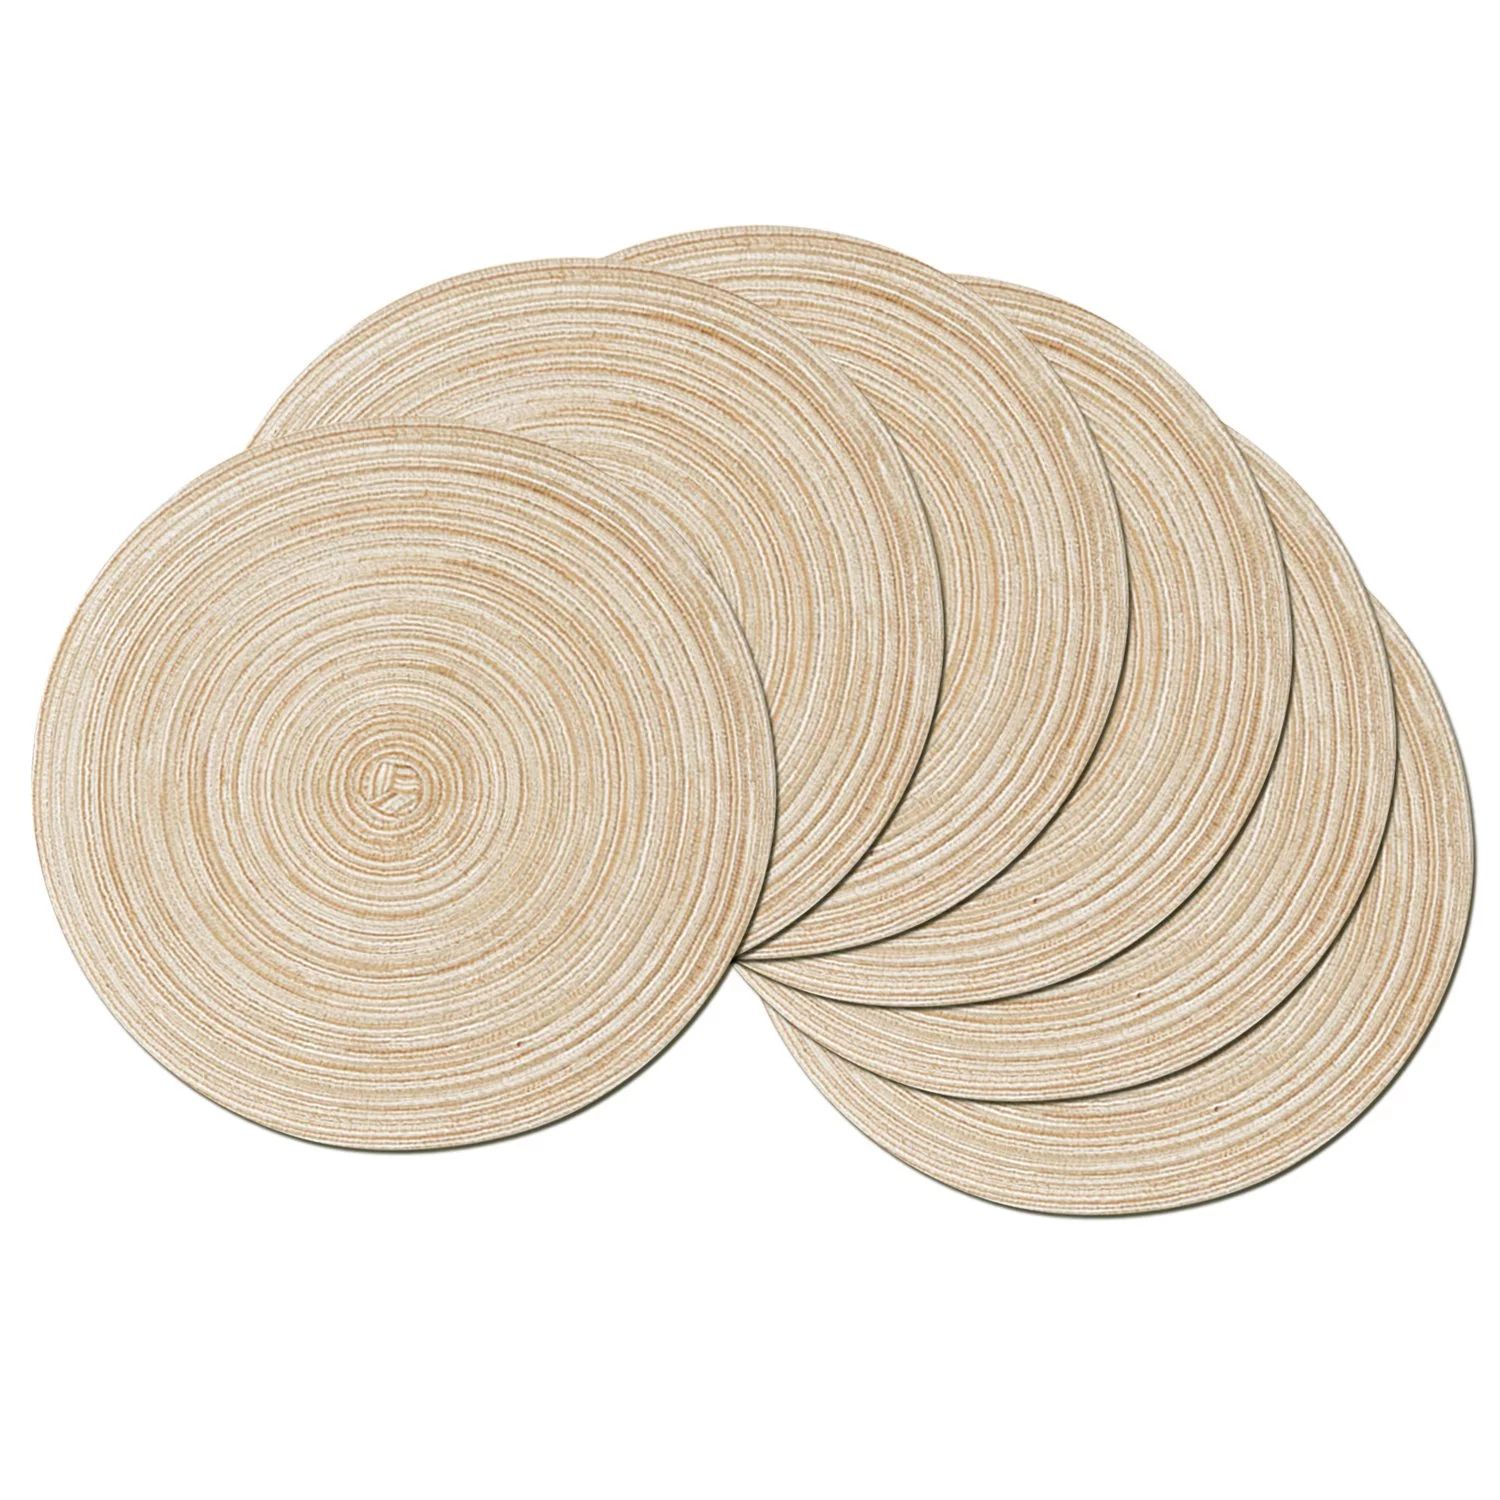 Coolmade Round Rop Cotton Braided Table Place Mats Braided Coaster Placemas Non-Slip Table Mats S... | Walmart (US)